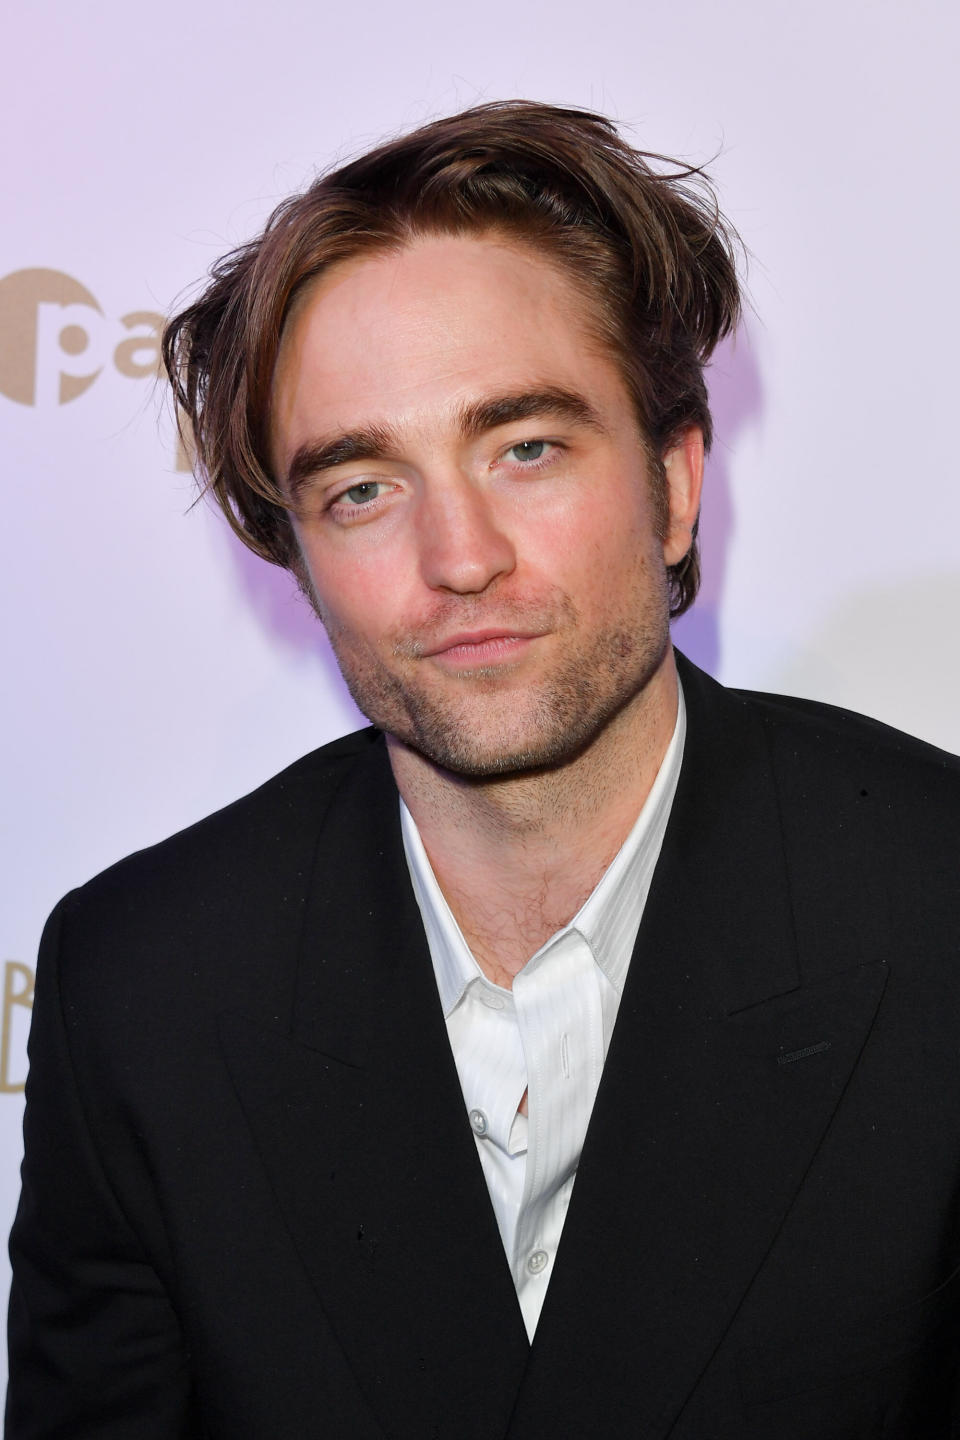 CANNES, FRANCE - MAY 19: Robert Pattinson attends the HFPA & Participant Media Honour Help Refugees' during the 72nd annual Cannes Film Festival on May 19, 2019 in Cannes, France. (Photo by George Pimentel/WireImage)